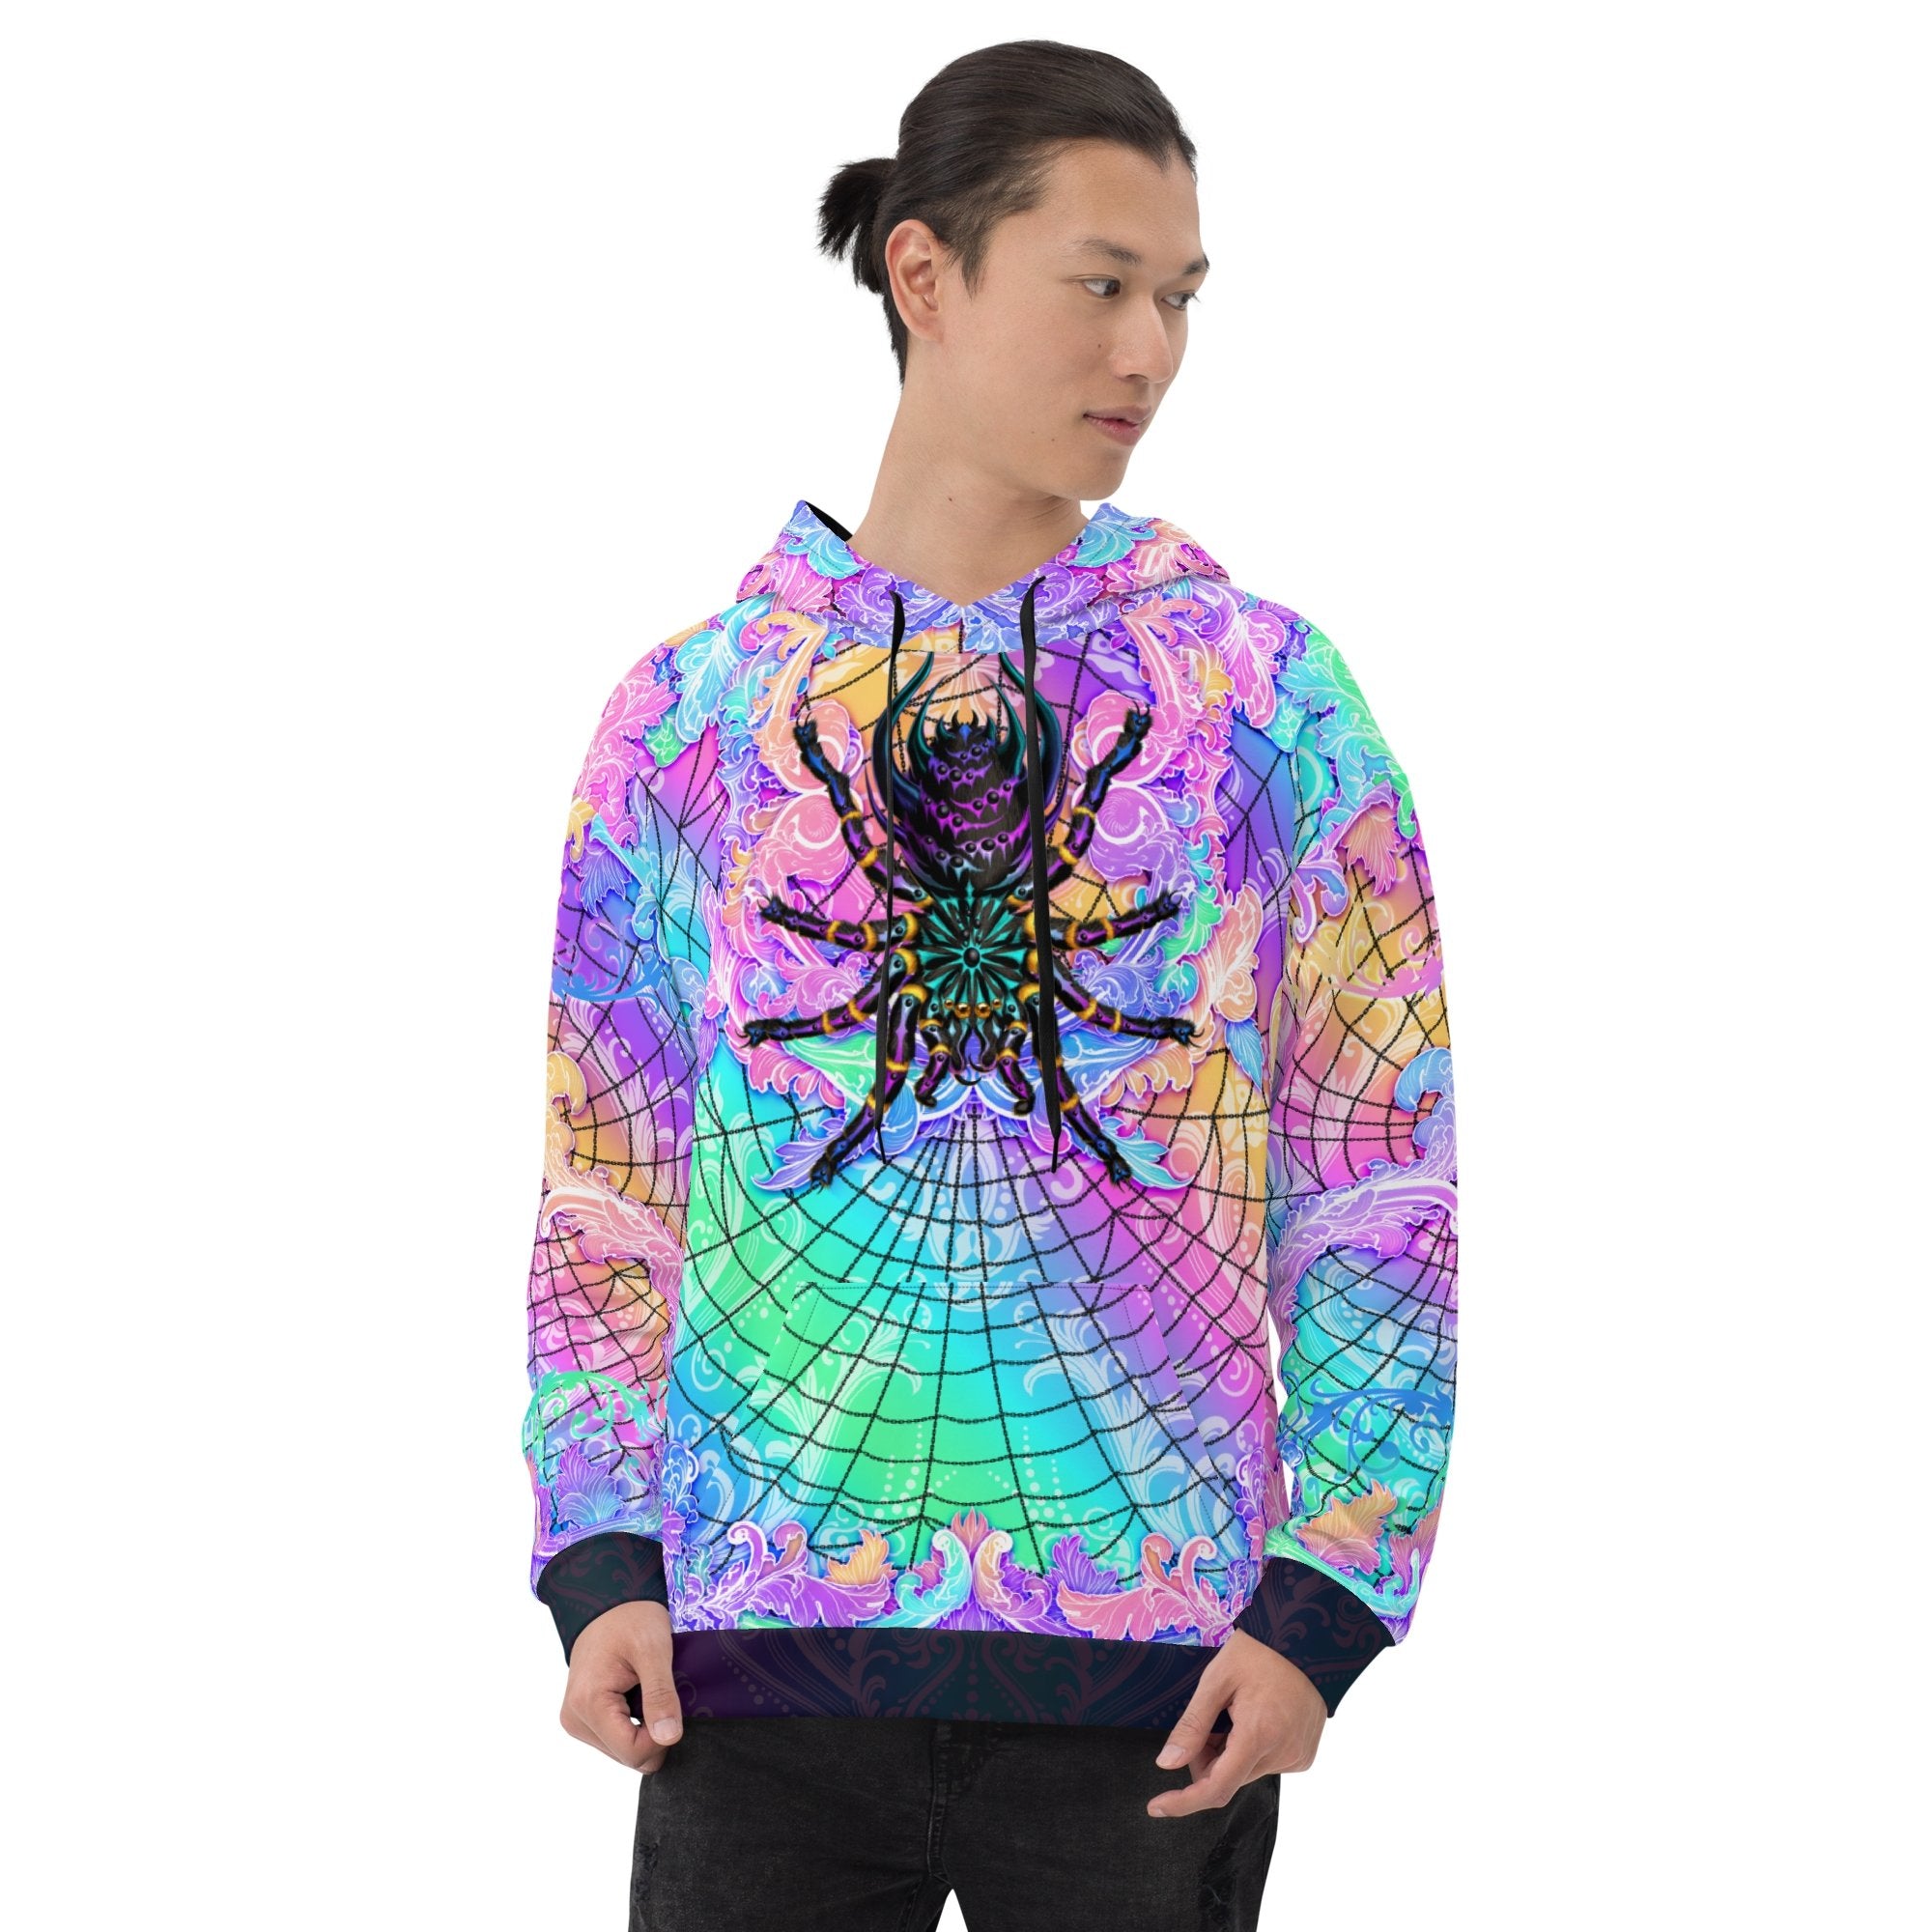 Psychedelic Hoodie, Aesthetic Streetwear, Rave Outfit, Skater and Festival Apparel, Holographic Pastel Punk Clothing, Unisex - Tarantula, Black Spider Art - Abysm Internal